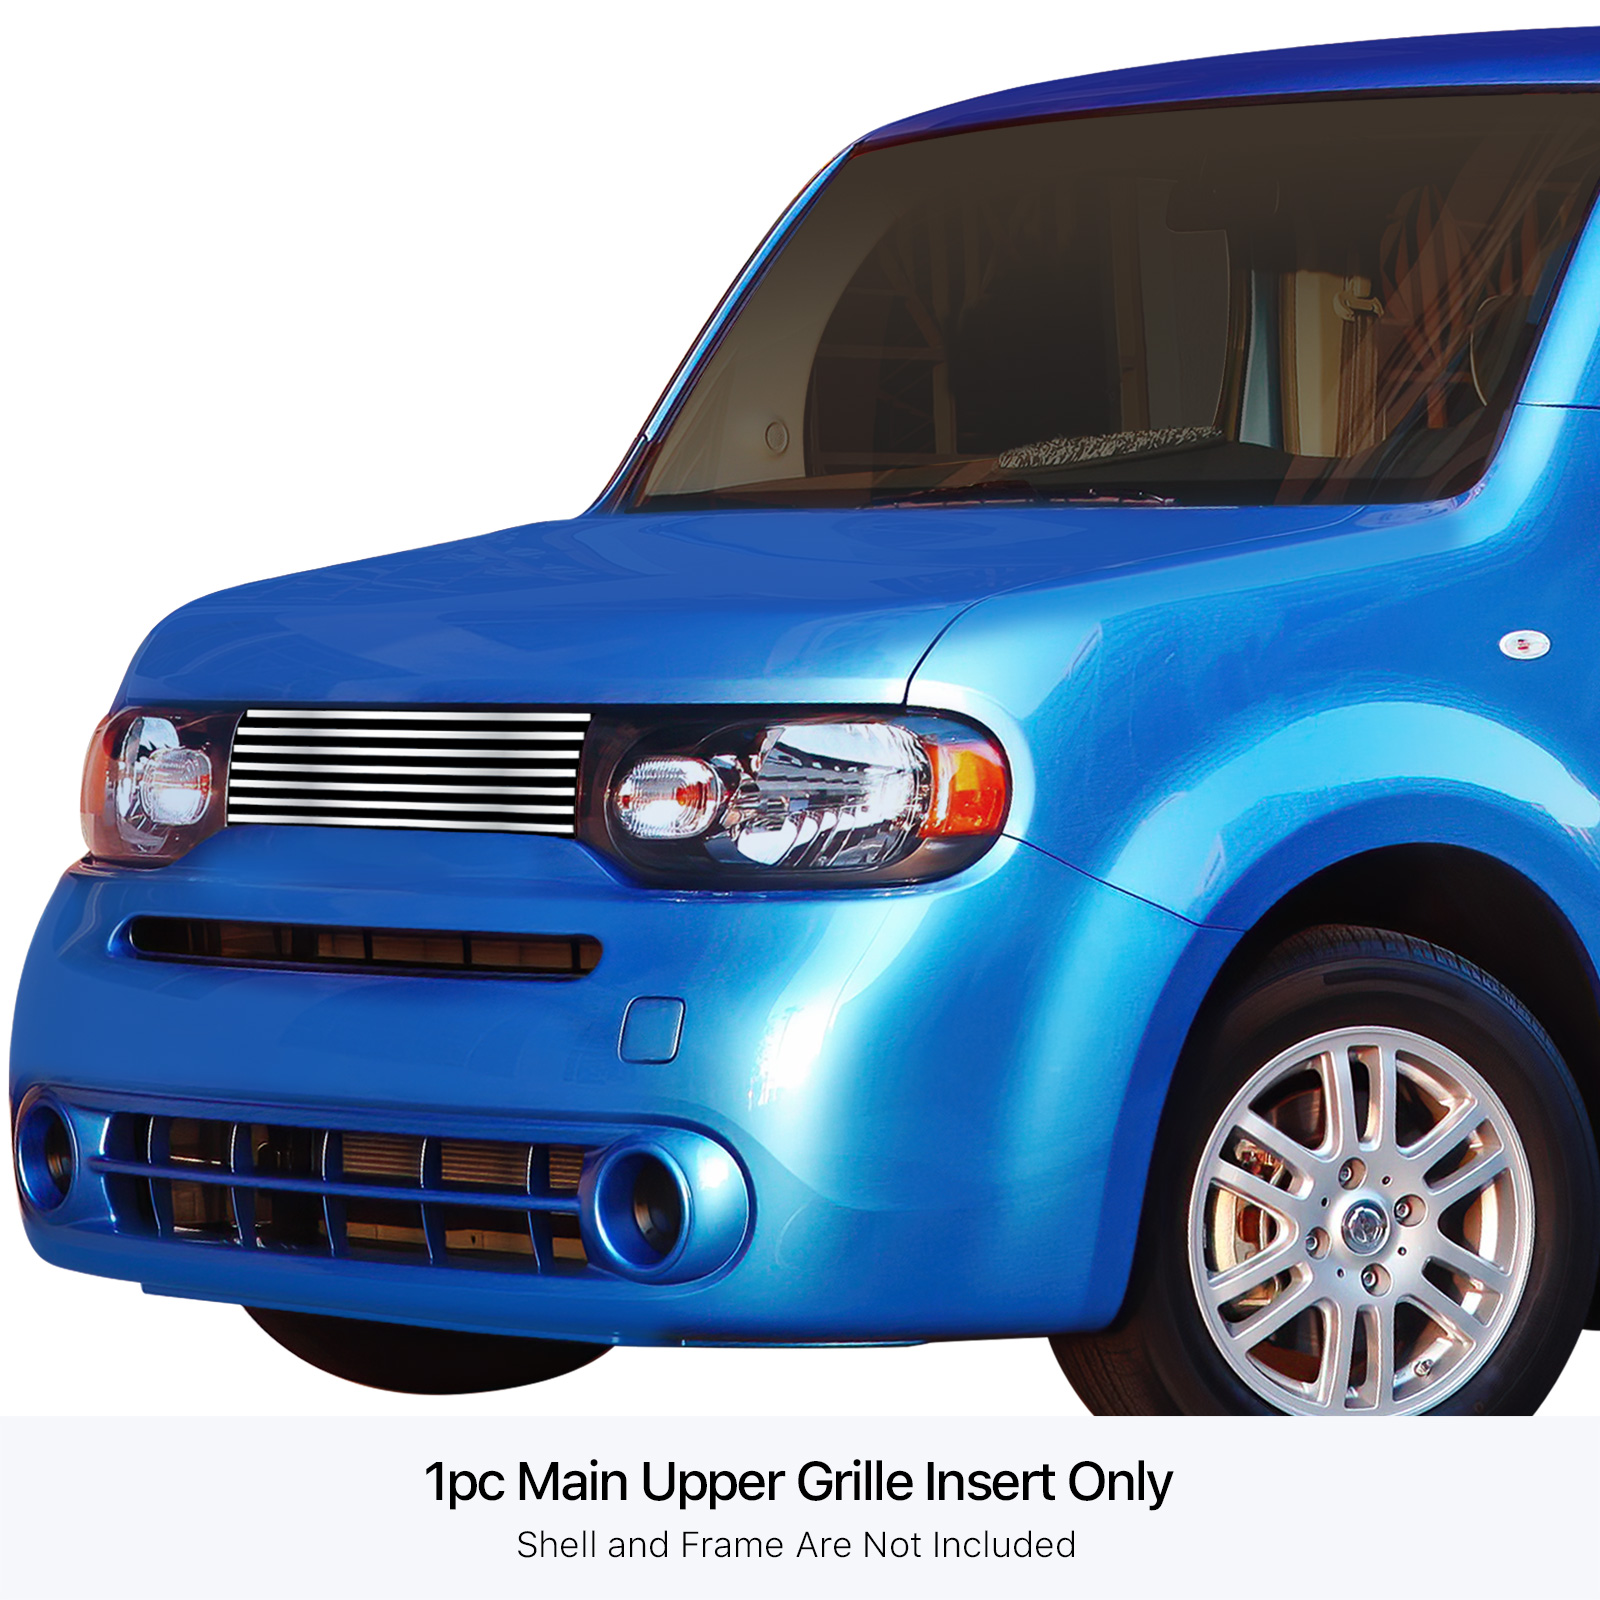 2009-2014 Nissan Cube Not For Krom edition MAIN UPPER Stainless Steel Billet Grille